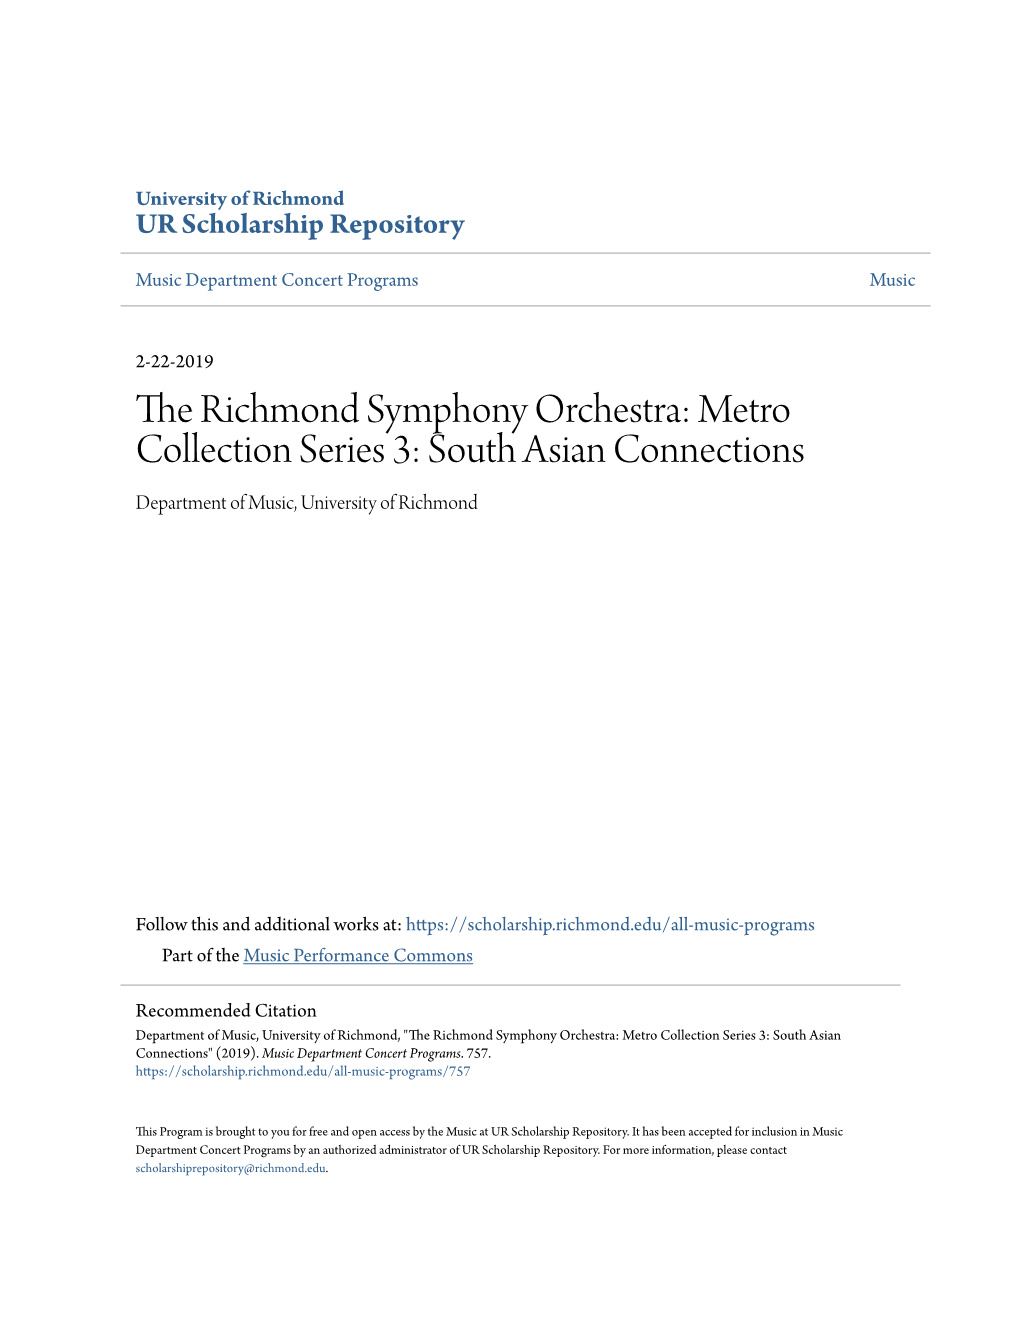 The Richmond Symphony Orchestra: Metro Collection Series 3: South Asian Connections Department of Music, University of Richmond